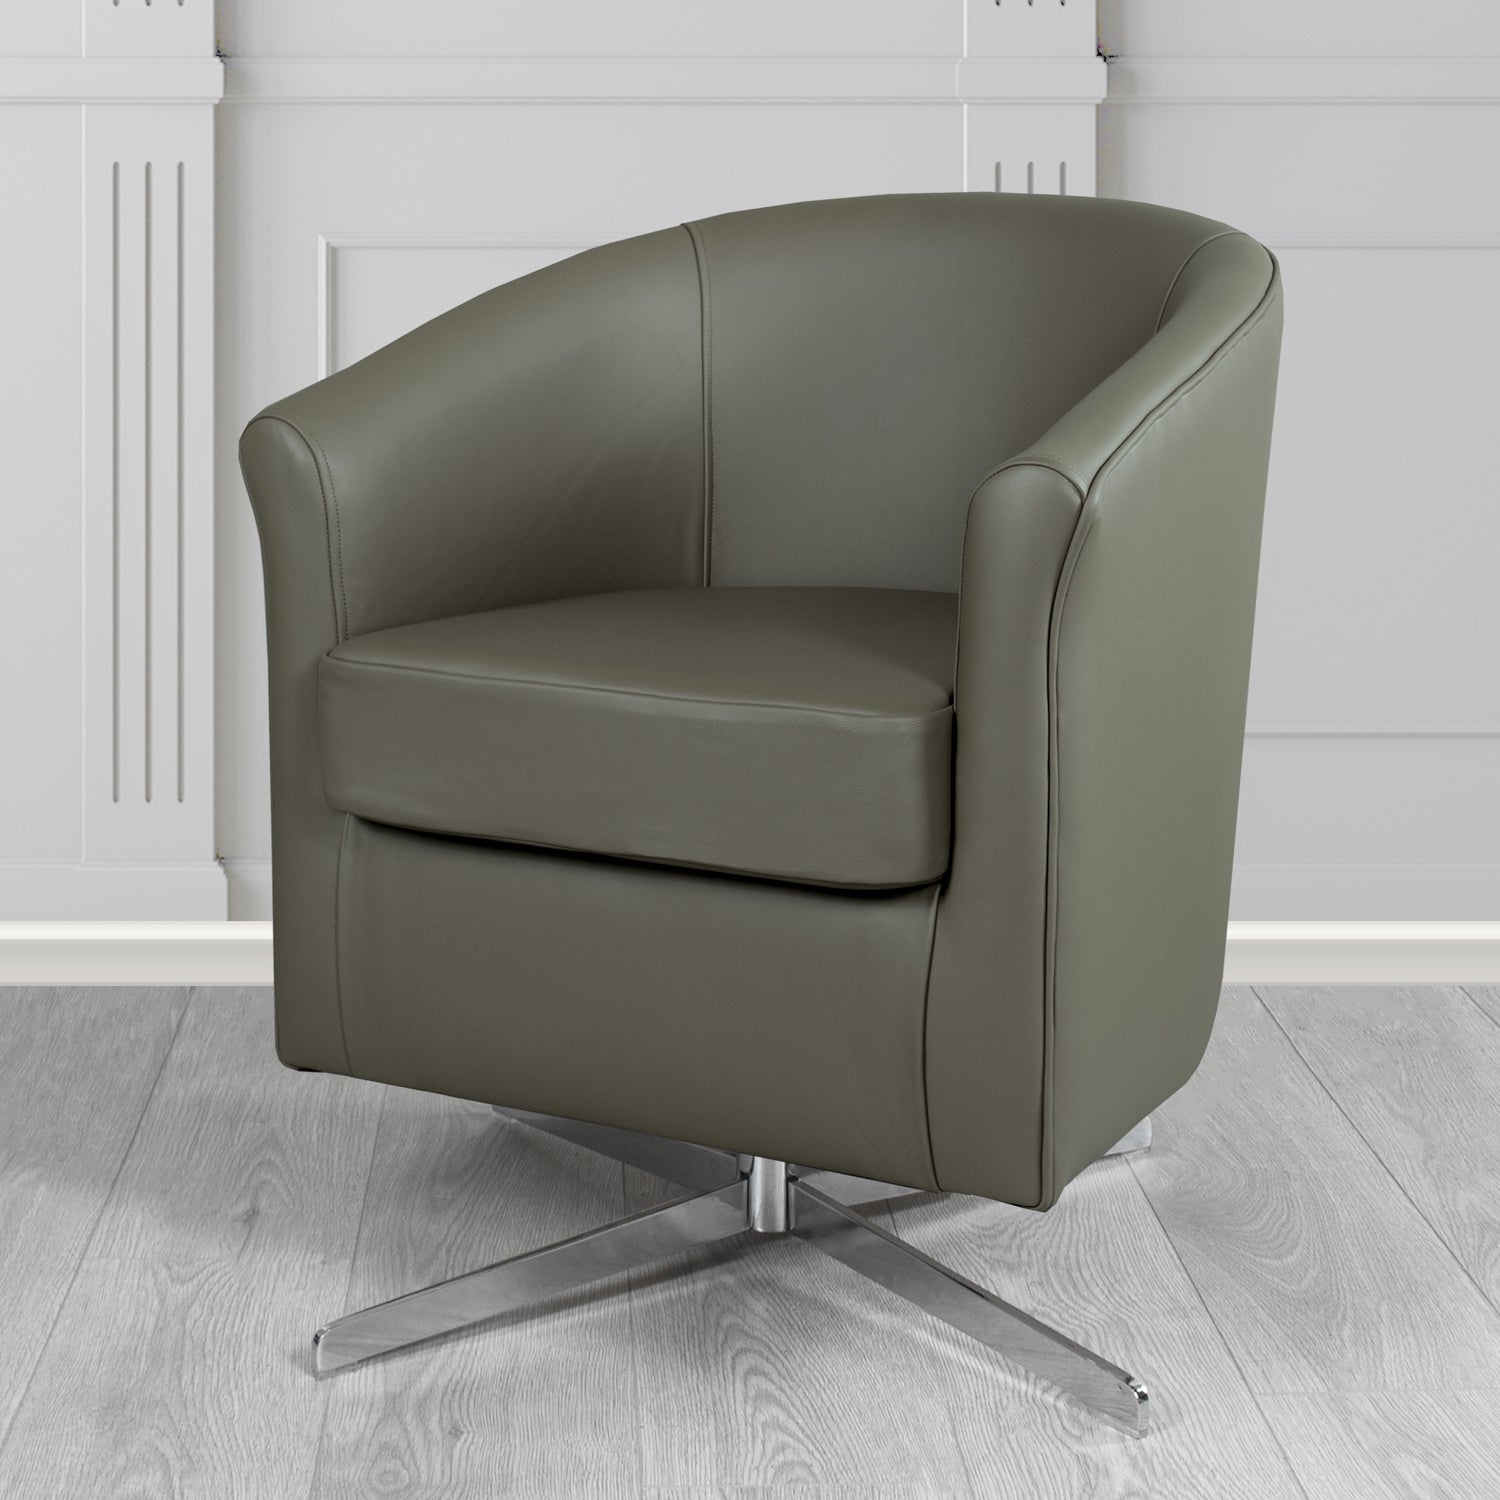 Cannes Swivel Tub Chair in Shelly Steel Crib 5 Genuine Leather - The Tub Chair Shop